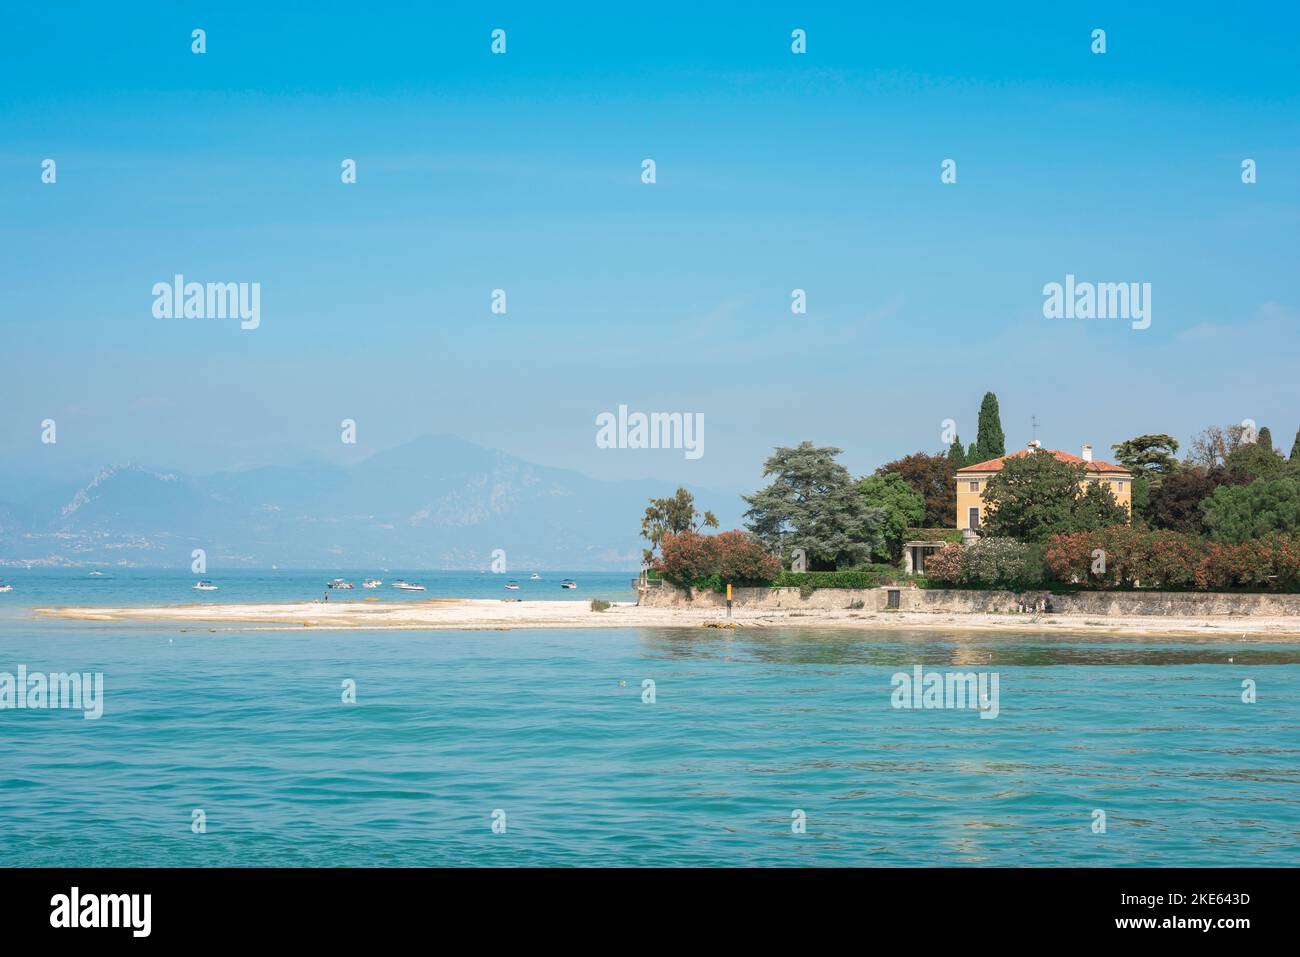 Sirmione Italy, view in summer of the white sandy beach at Punta Staffalo on the scenic western shore of the Sirmione peninsula, Lake Garda, Italy Stock Photo